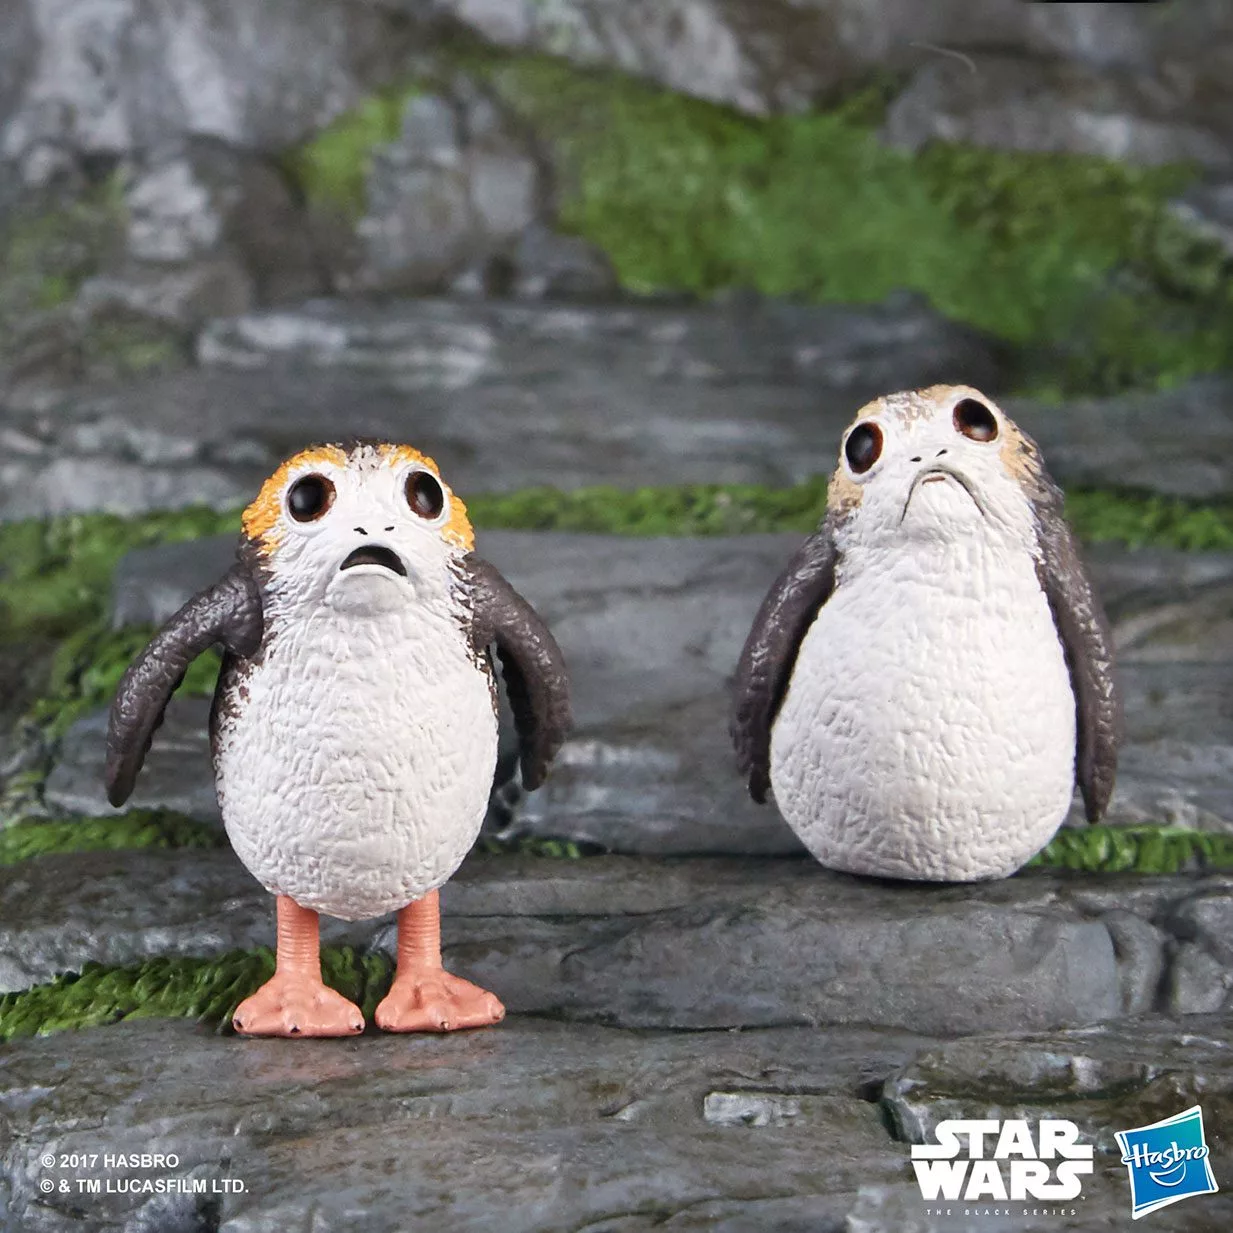 STAR WARS THE BLACK SERIES 6 INCH SCALE Porgs